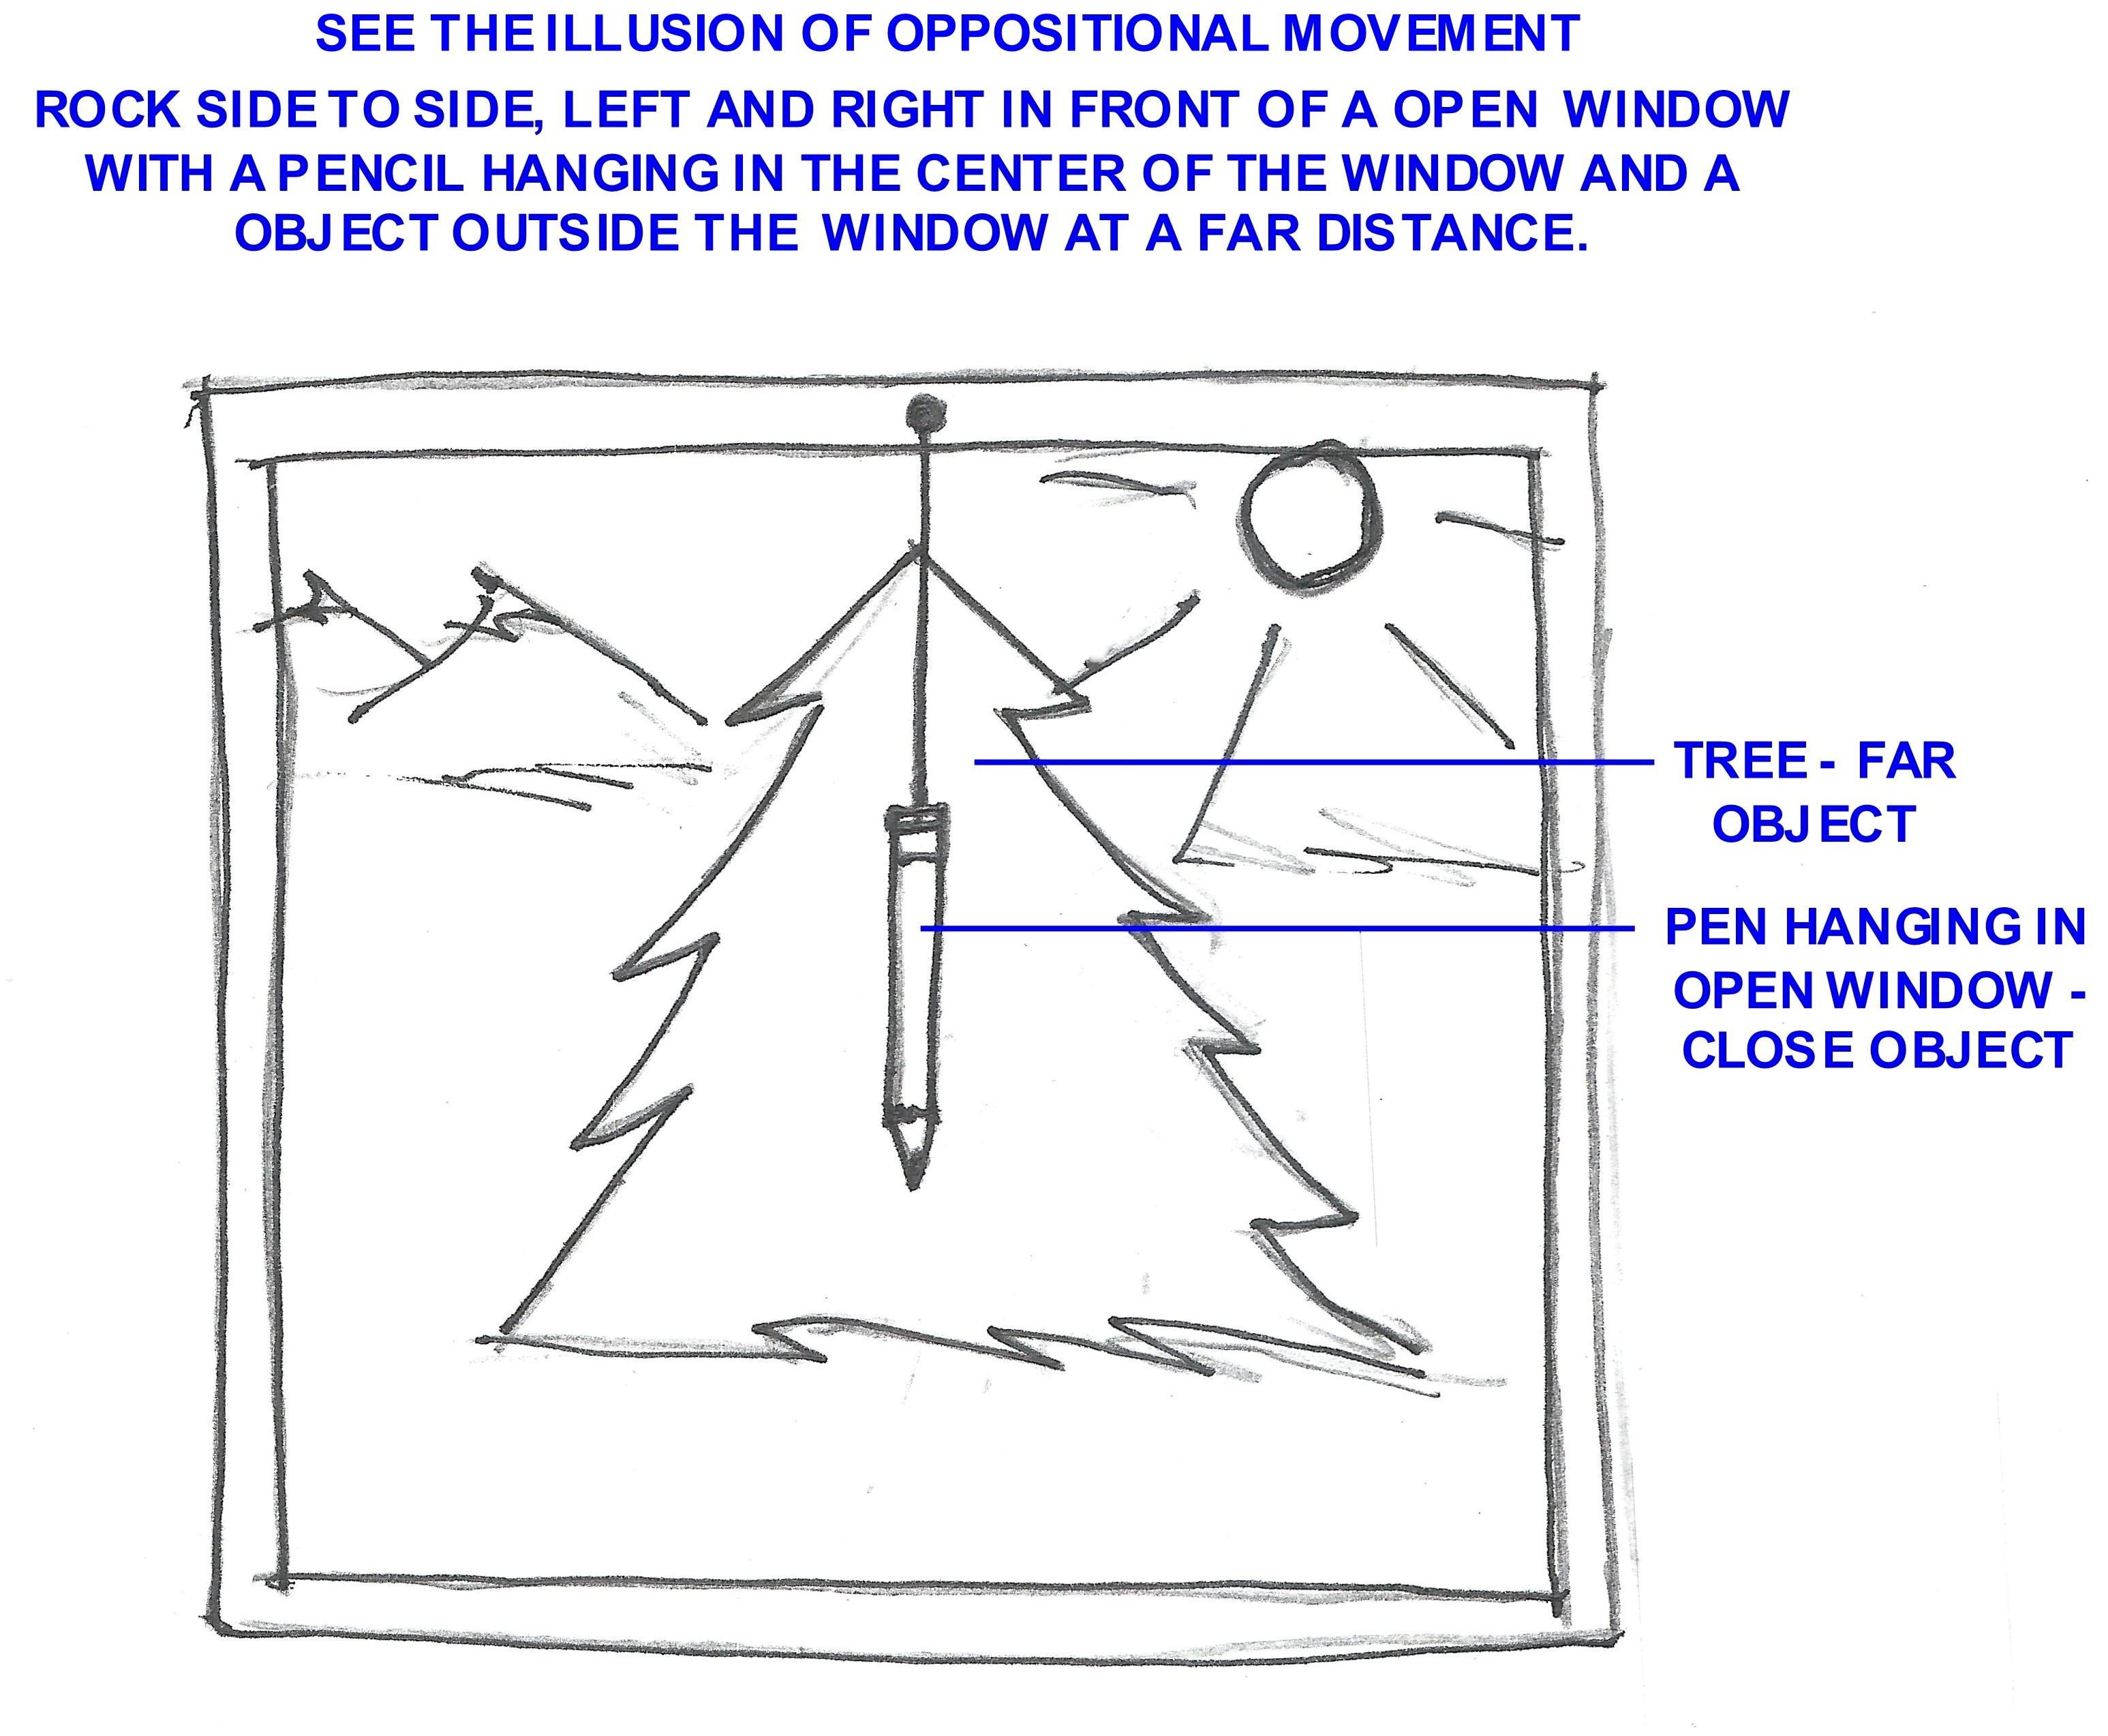 ROCK LEFT AND RIGHT IN FRONT OF THE WINDOW AND SEE THE ILLUSION OF OPPOSITIONAL MOVEMENT